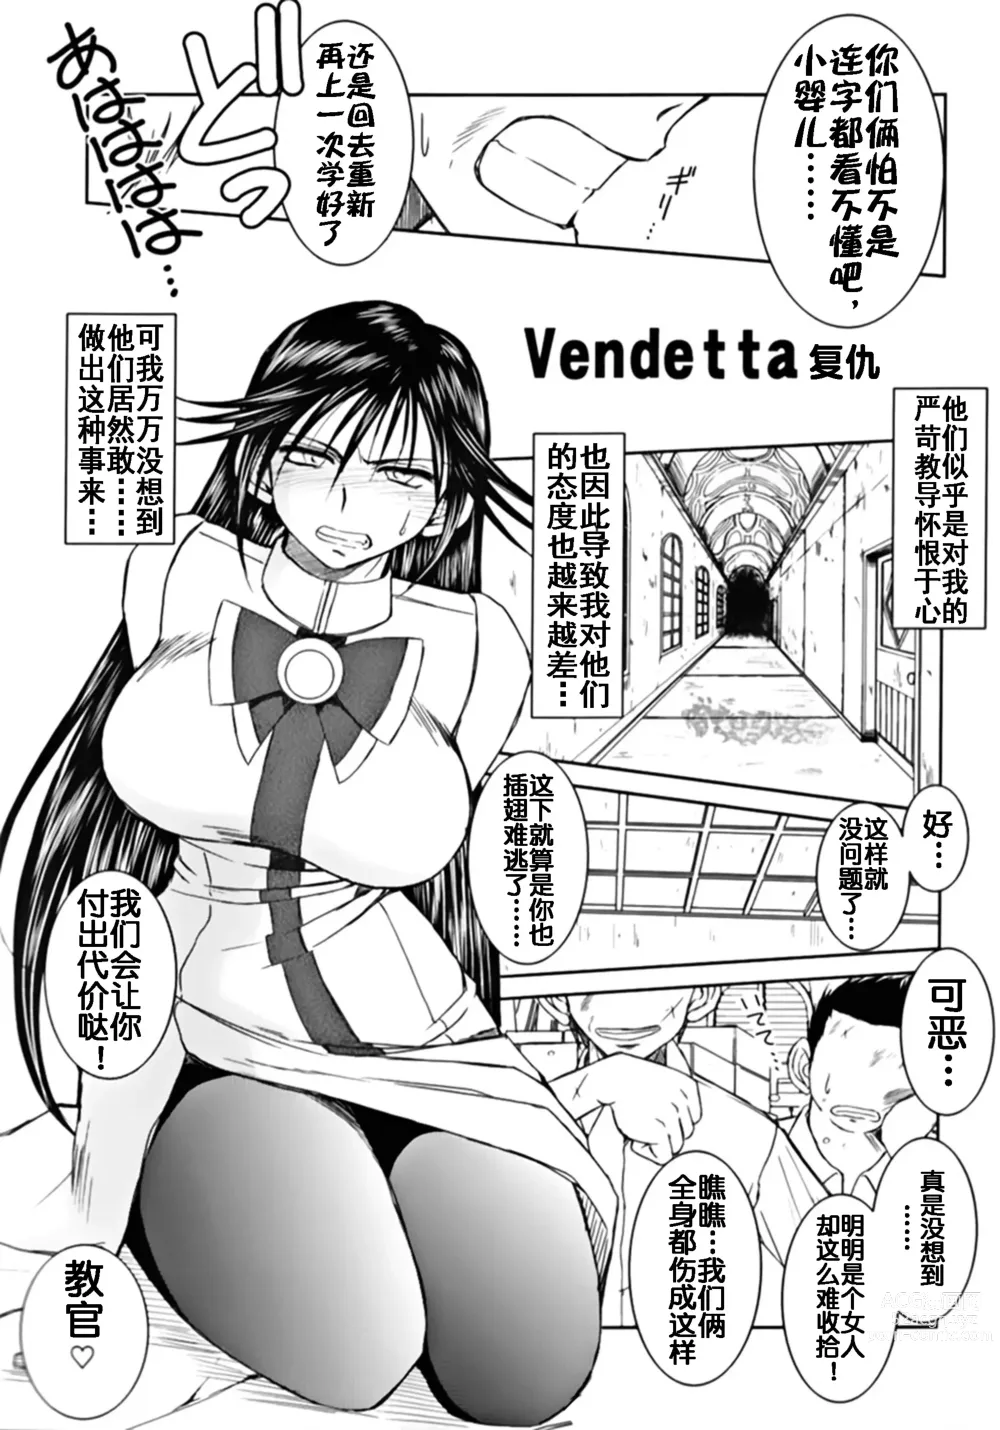 Page 3 of doujinshi 真红蔷薇